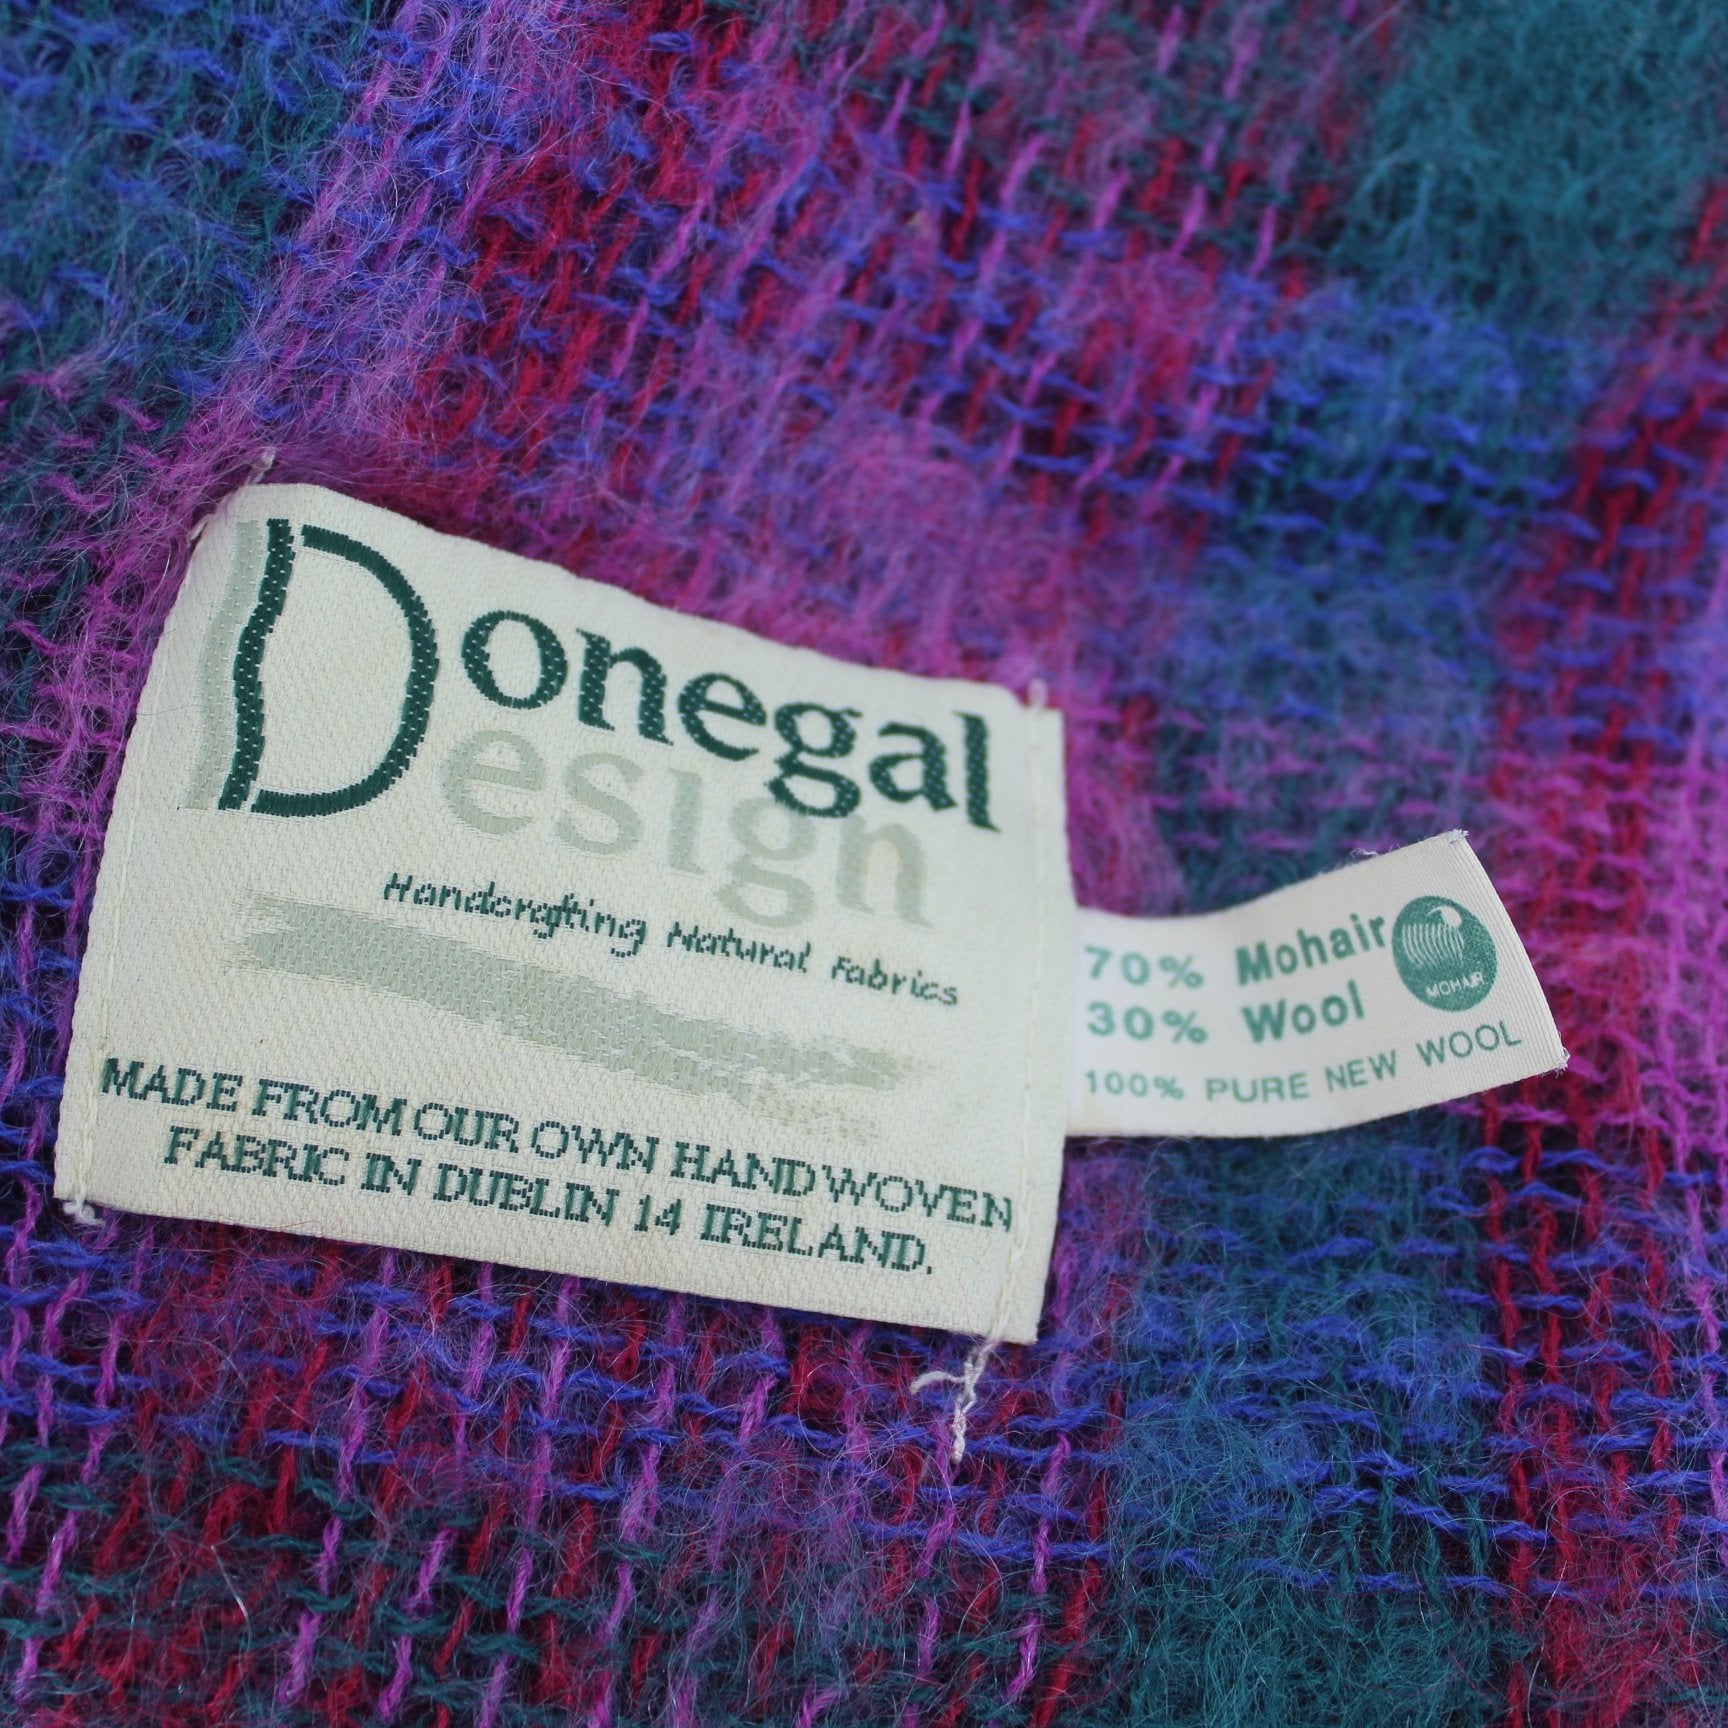 Donegal Hand Crafted Mohair Throw Blanket Awesome Jewel Colors Ireland orig maker ribbon tags